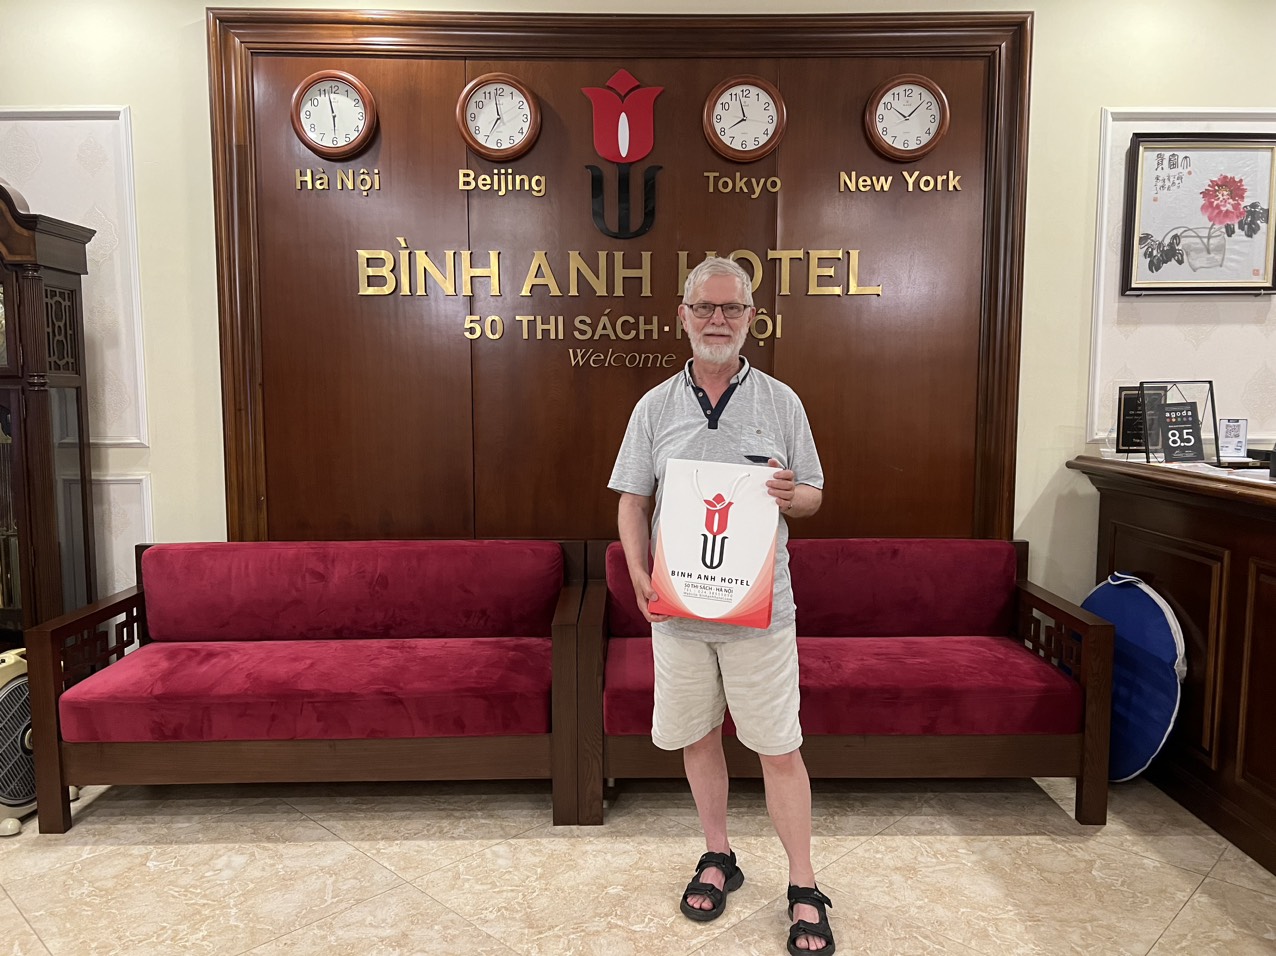 <p>I booked 4 nights at Binh Anh Hotel on Experia. It's so clean, good services and reasonable price! Thanks for giving me the gift! I will share Binh Anh Hotel to my friends!</p>
